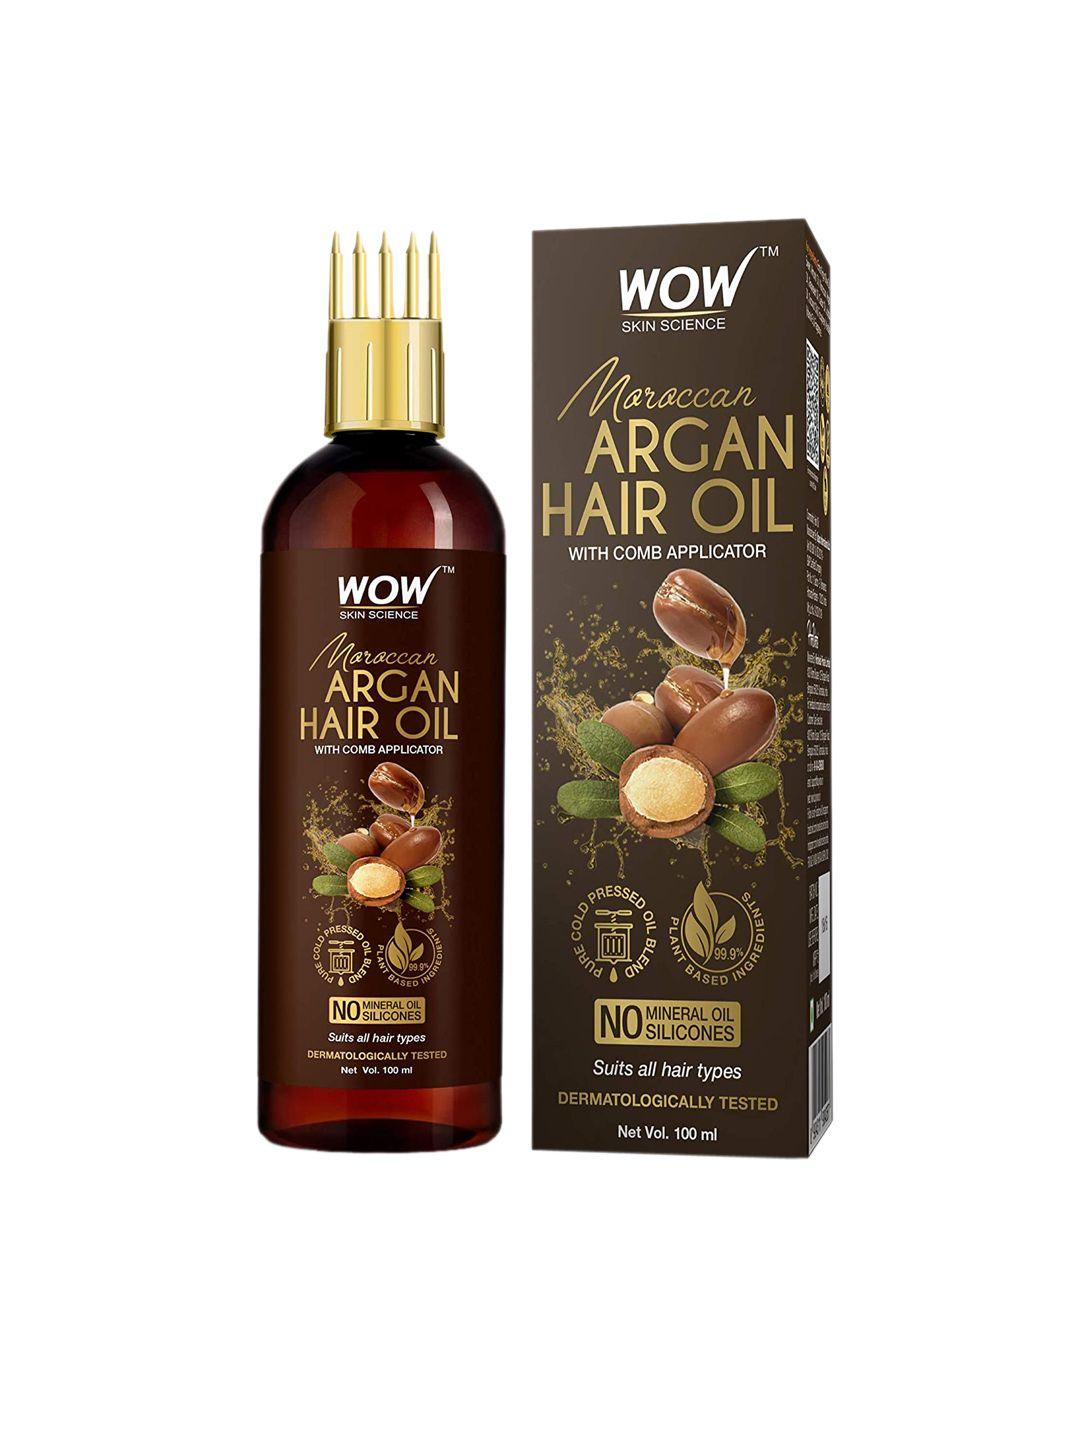 wow-skin-science-moroccan-argan-hair-oil-with-comb-applicator-100-ml